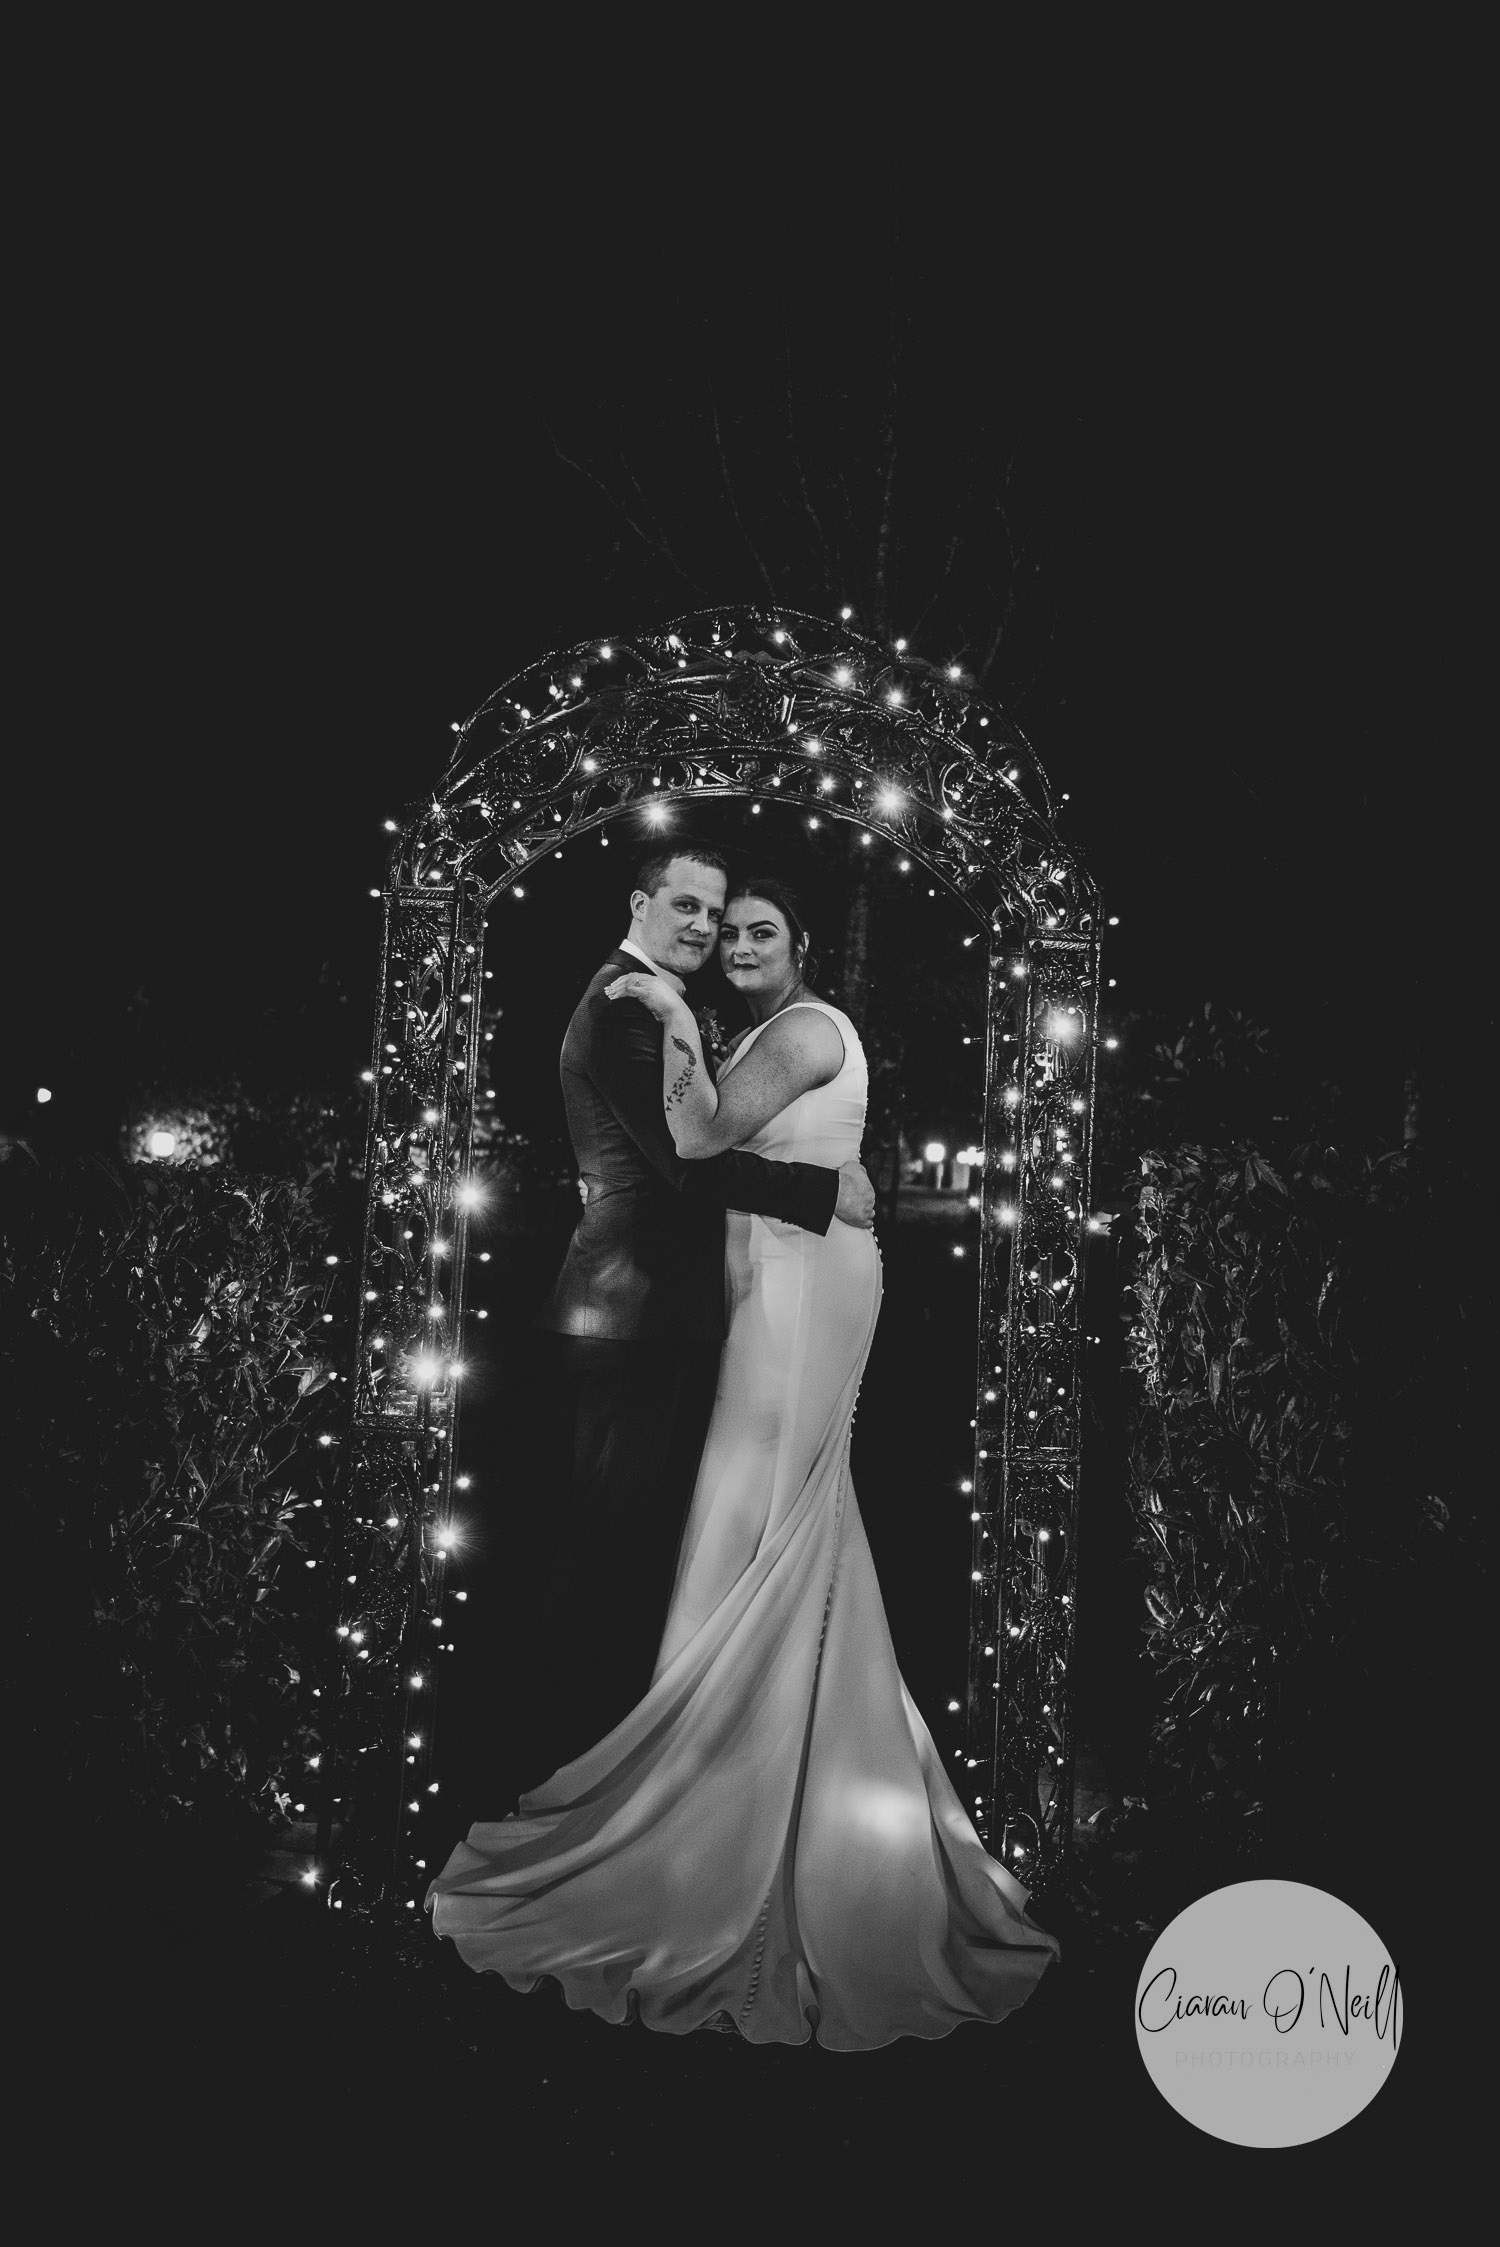 nighttime photo of bride and groom lit with fairy lights on an archway